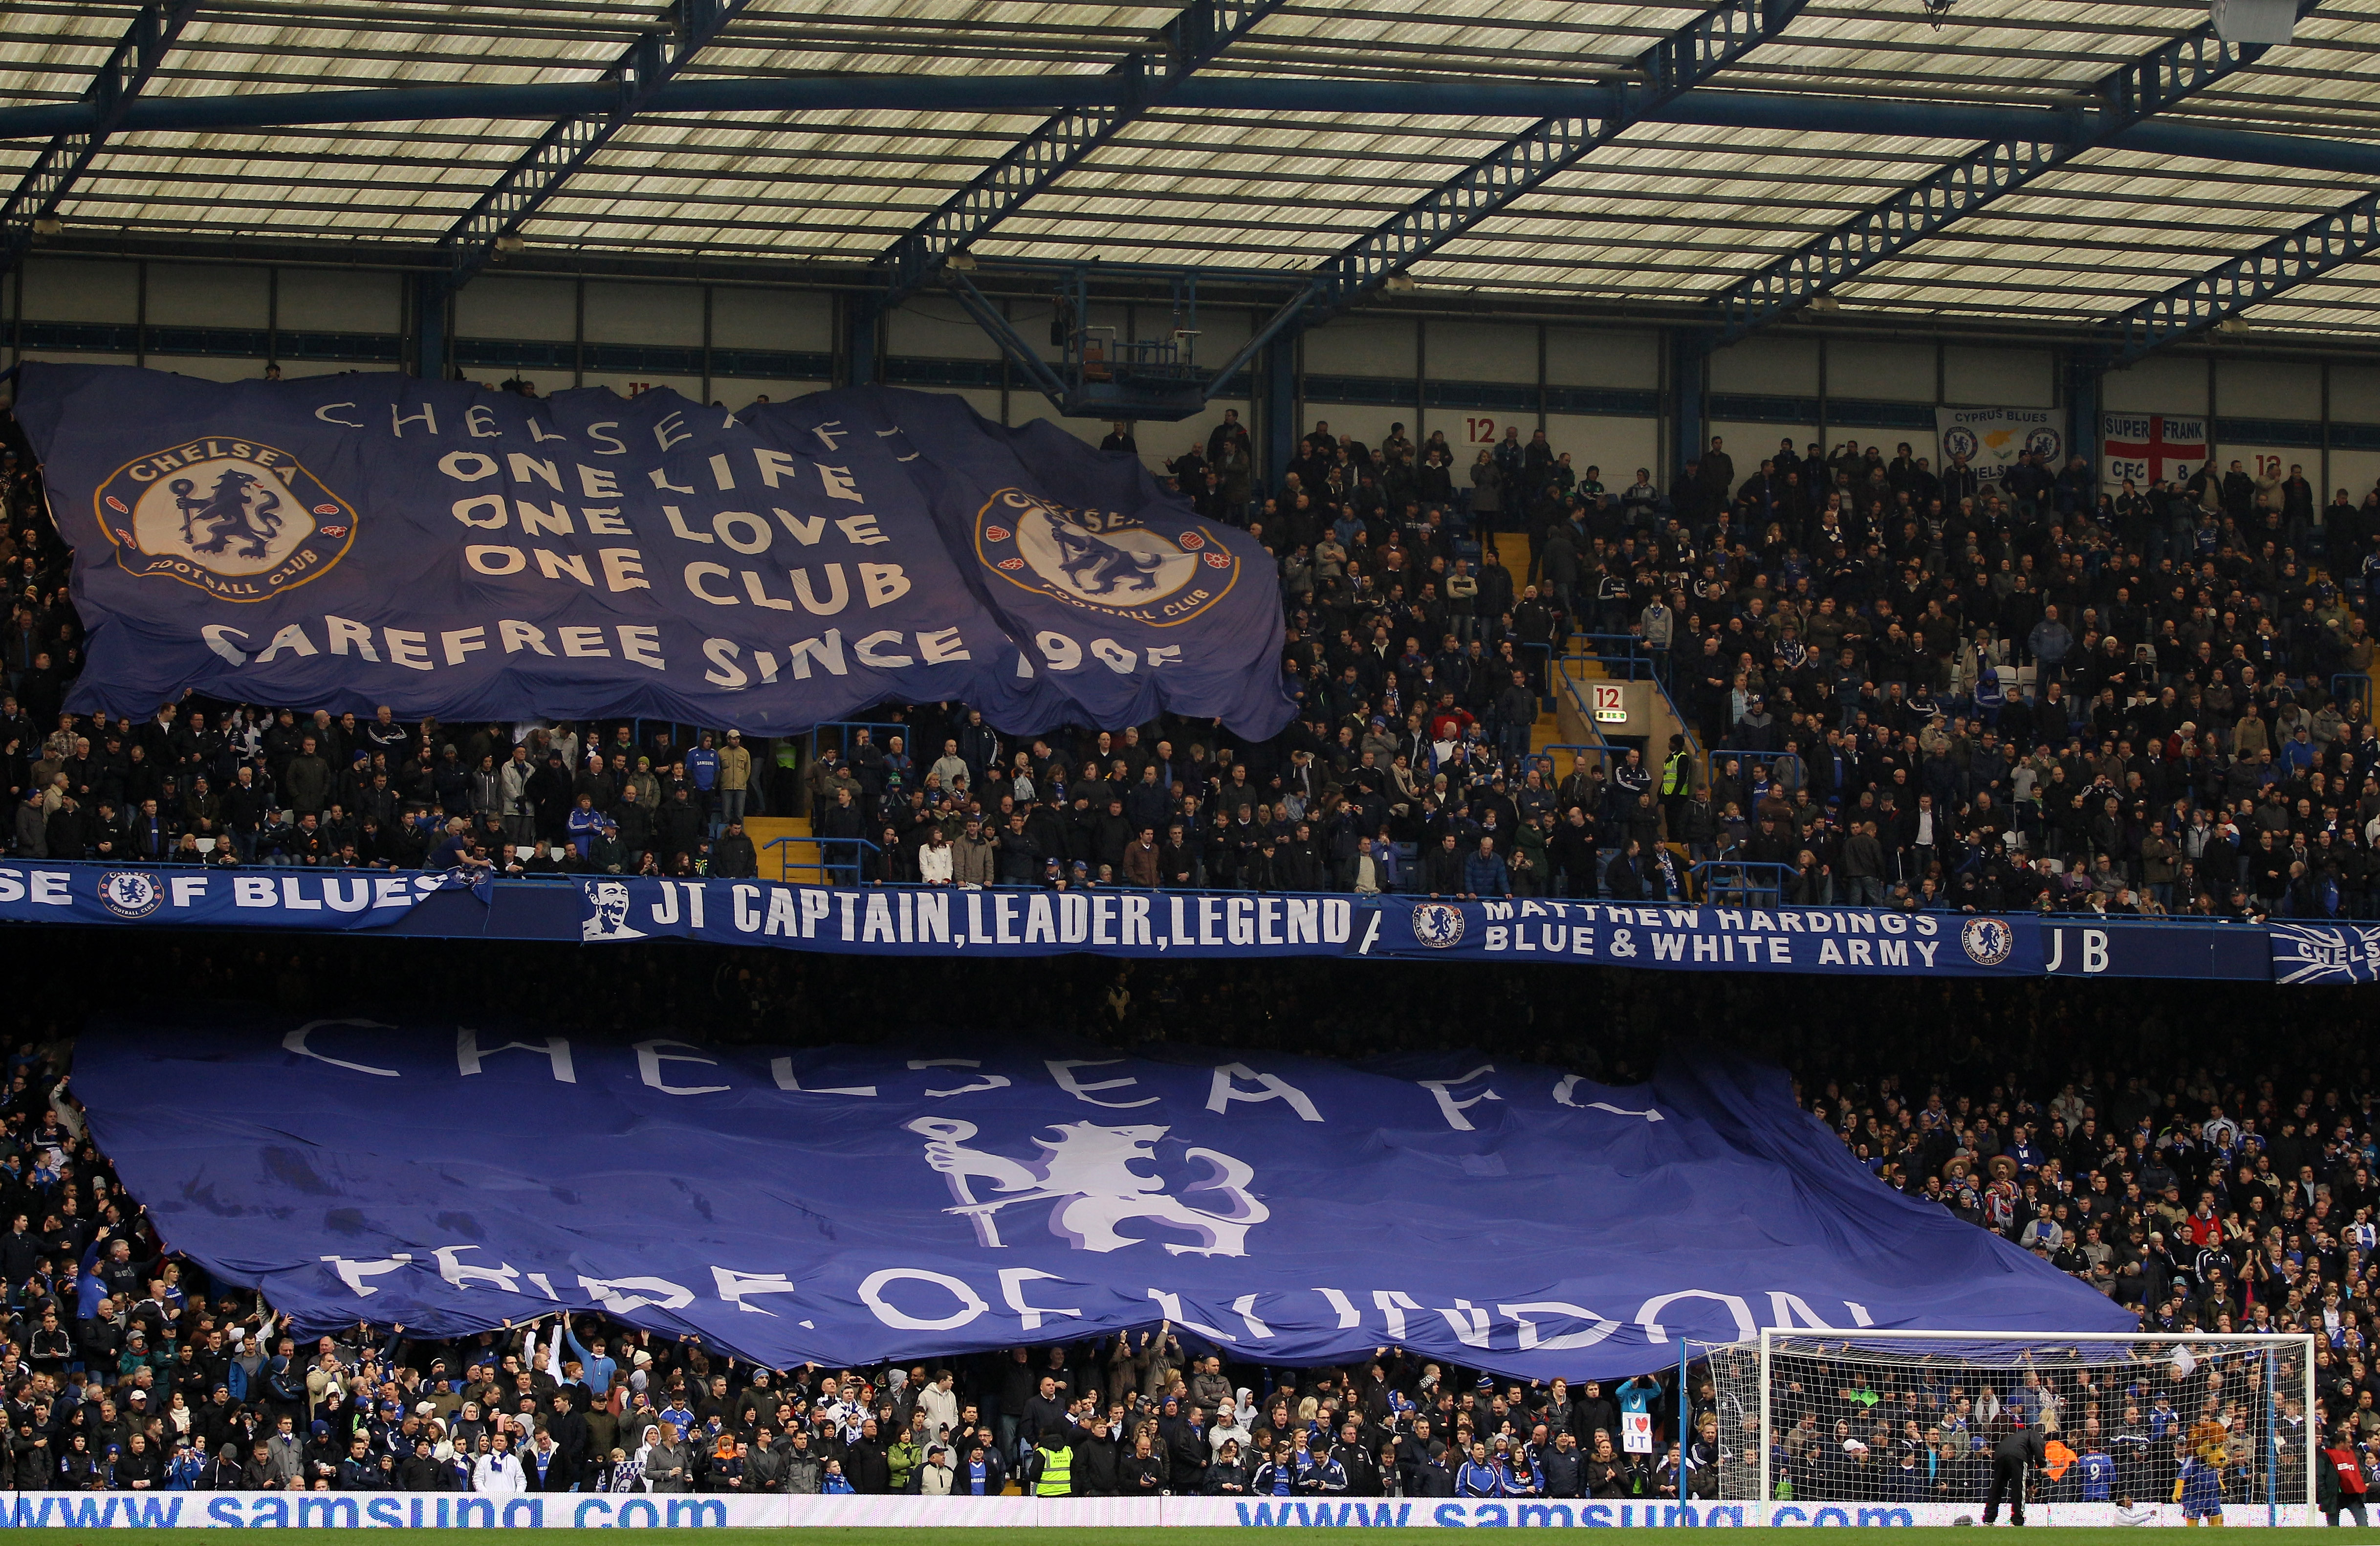 LONDON, ENGLAND - FEBRUARY 19:  Chelsea fans cheer on their team prior to kickoff during the FA Cup sponsored by E.ON 4th round replay match between Chelsea and Everton at Stamford Bridge on February 19, 2011 in London, England.  (Photo by Richard Heathco